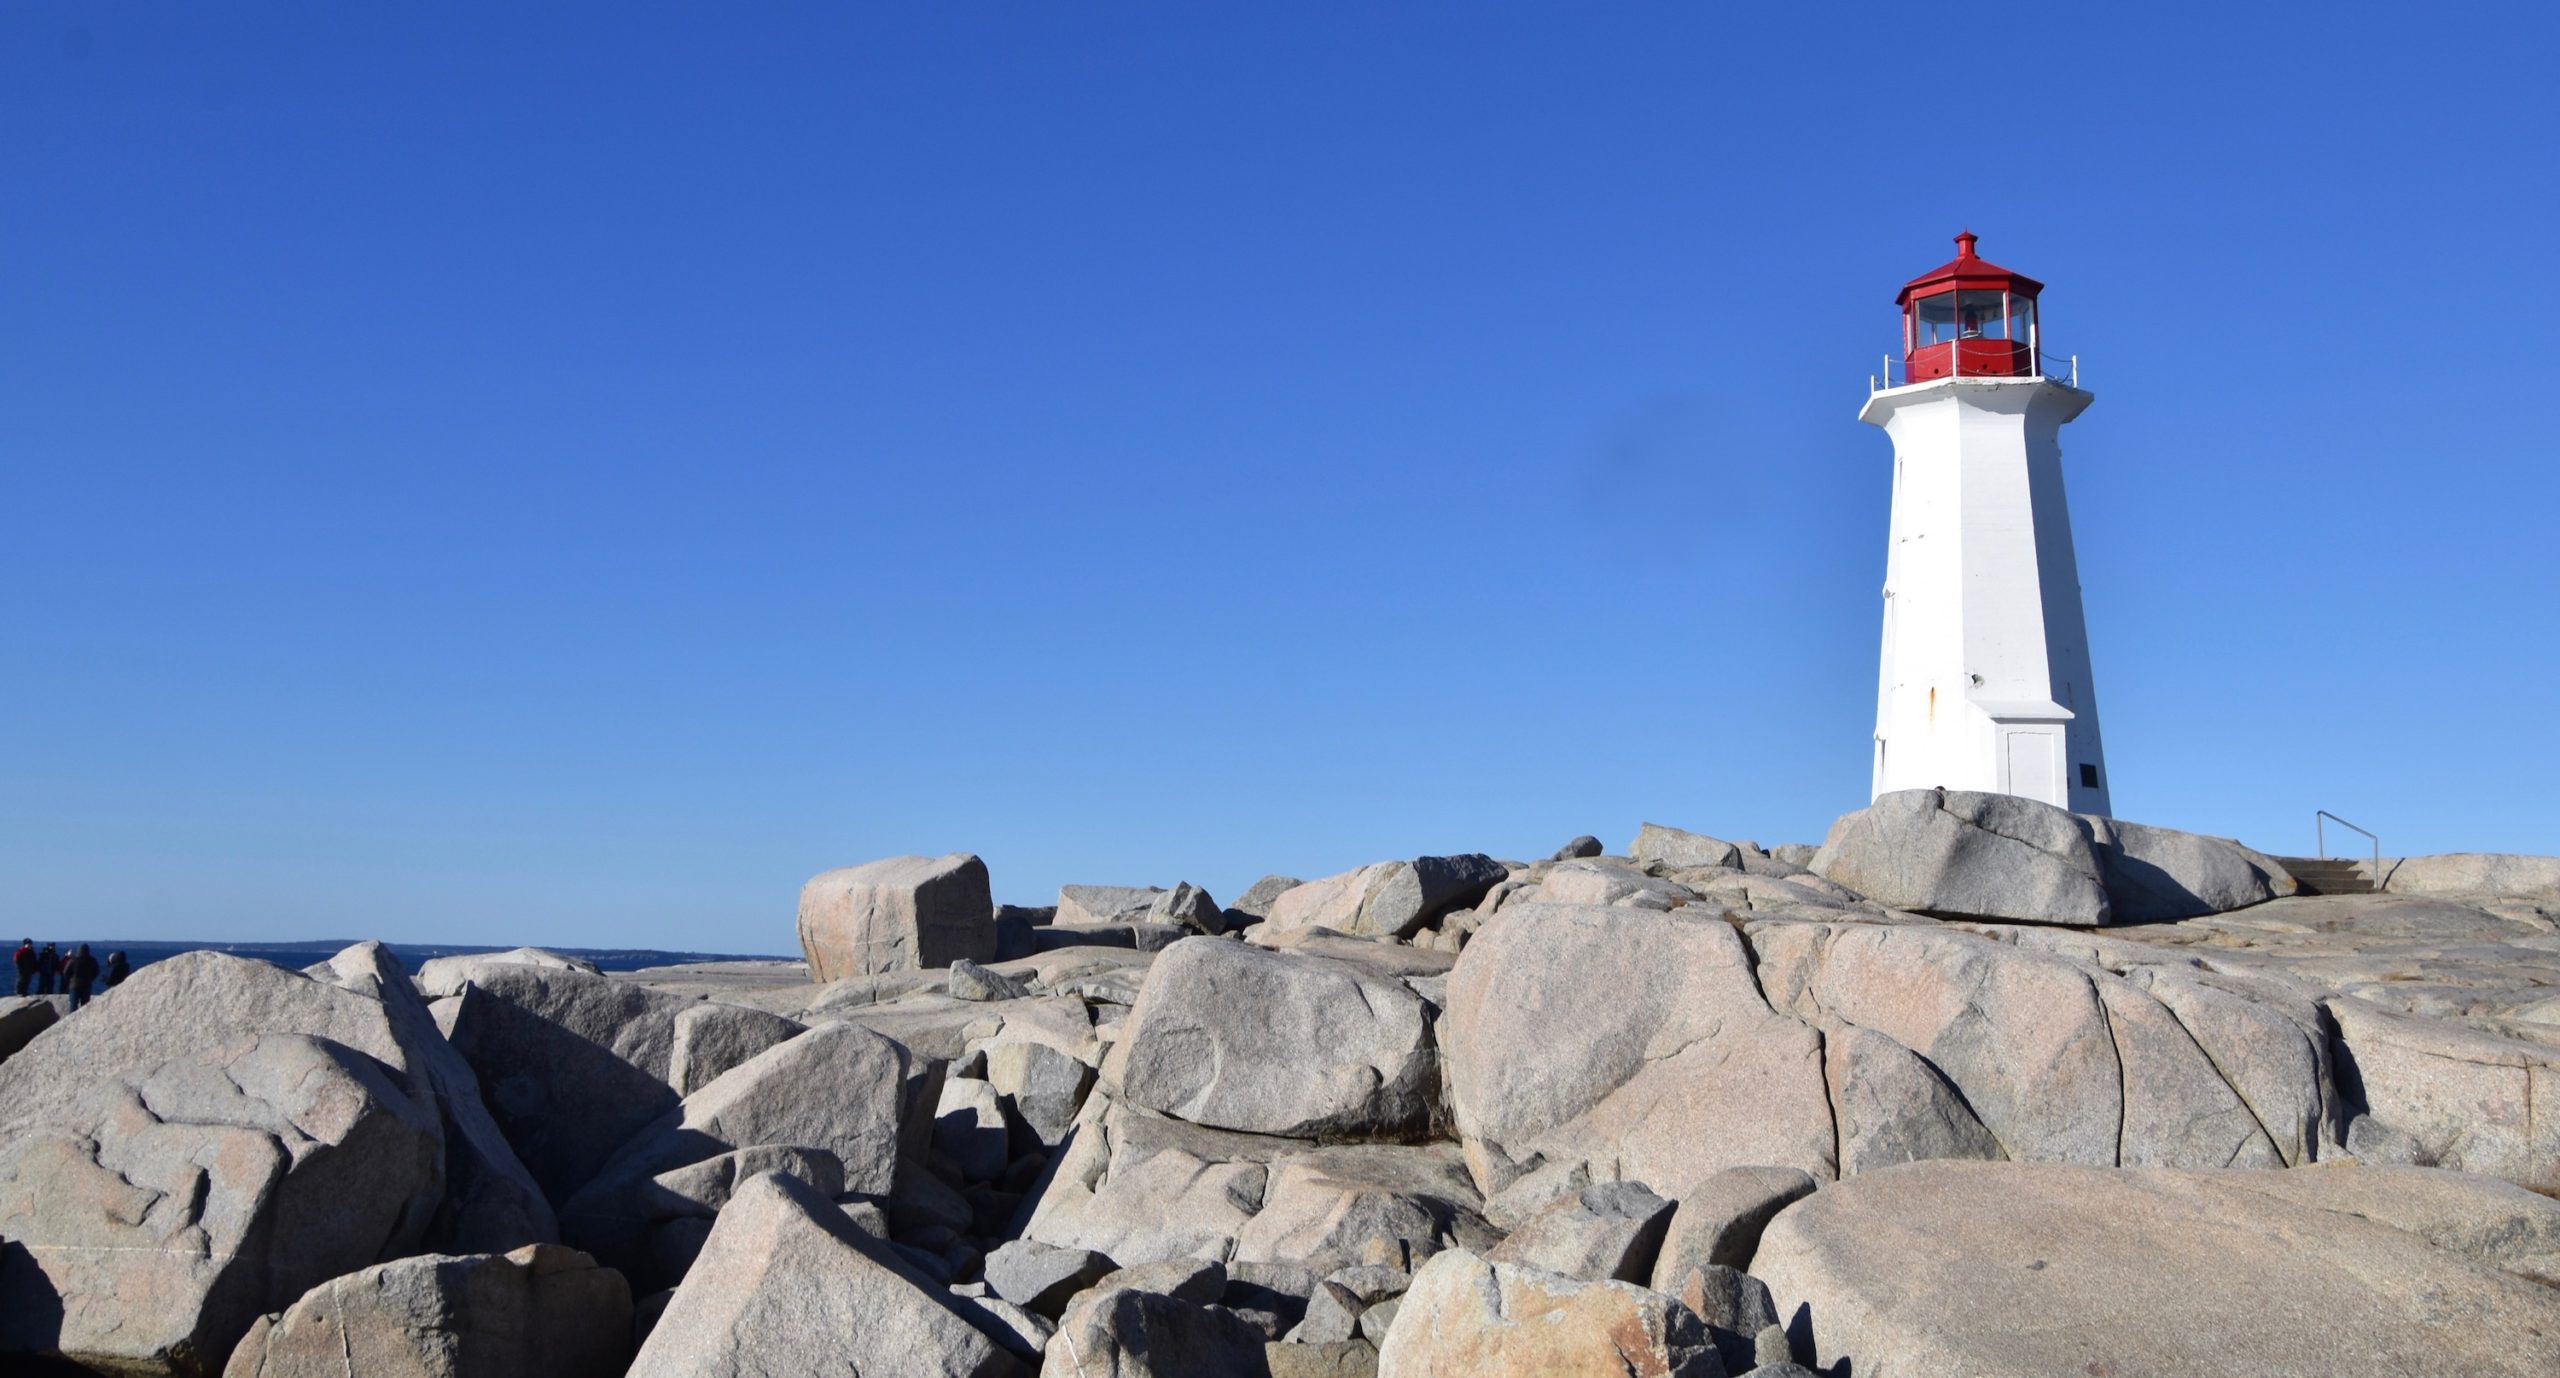 Lighthouse at Peggys Cove